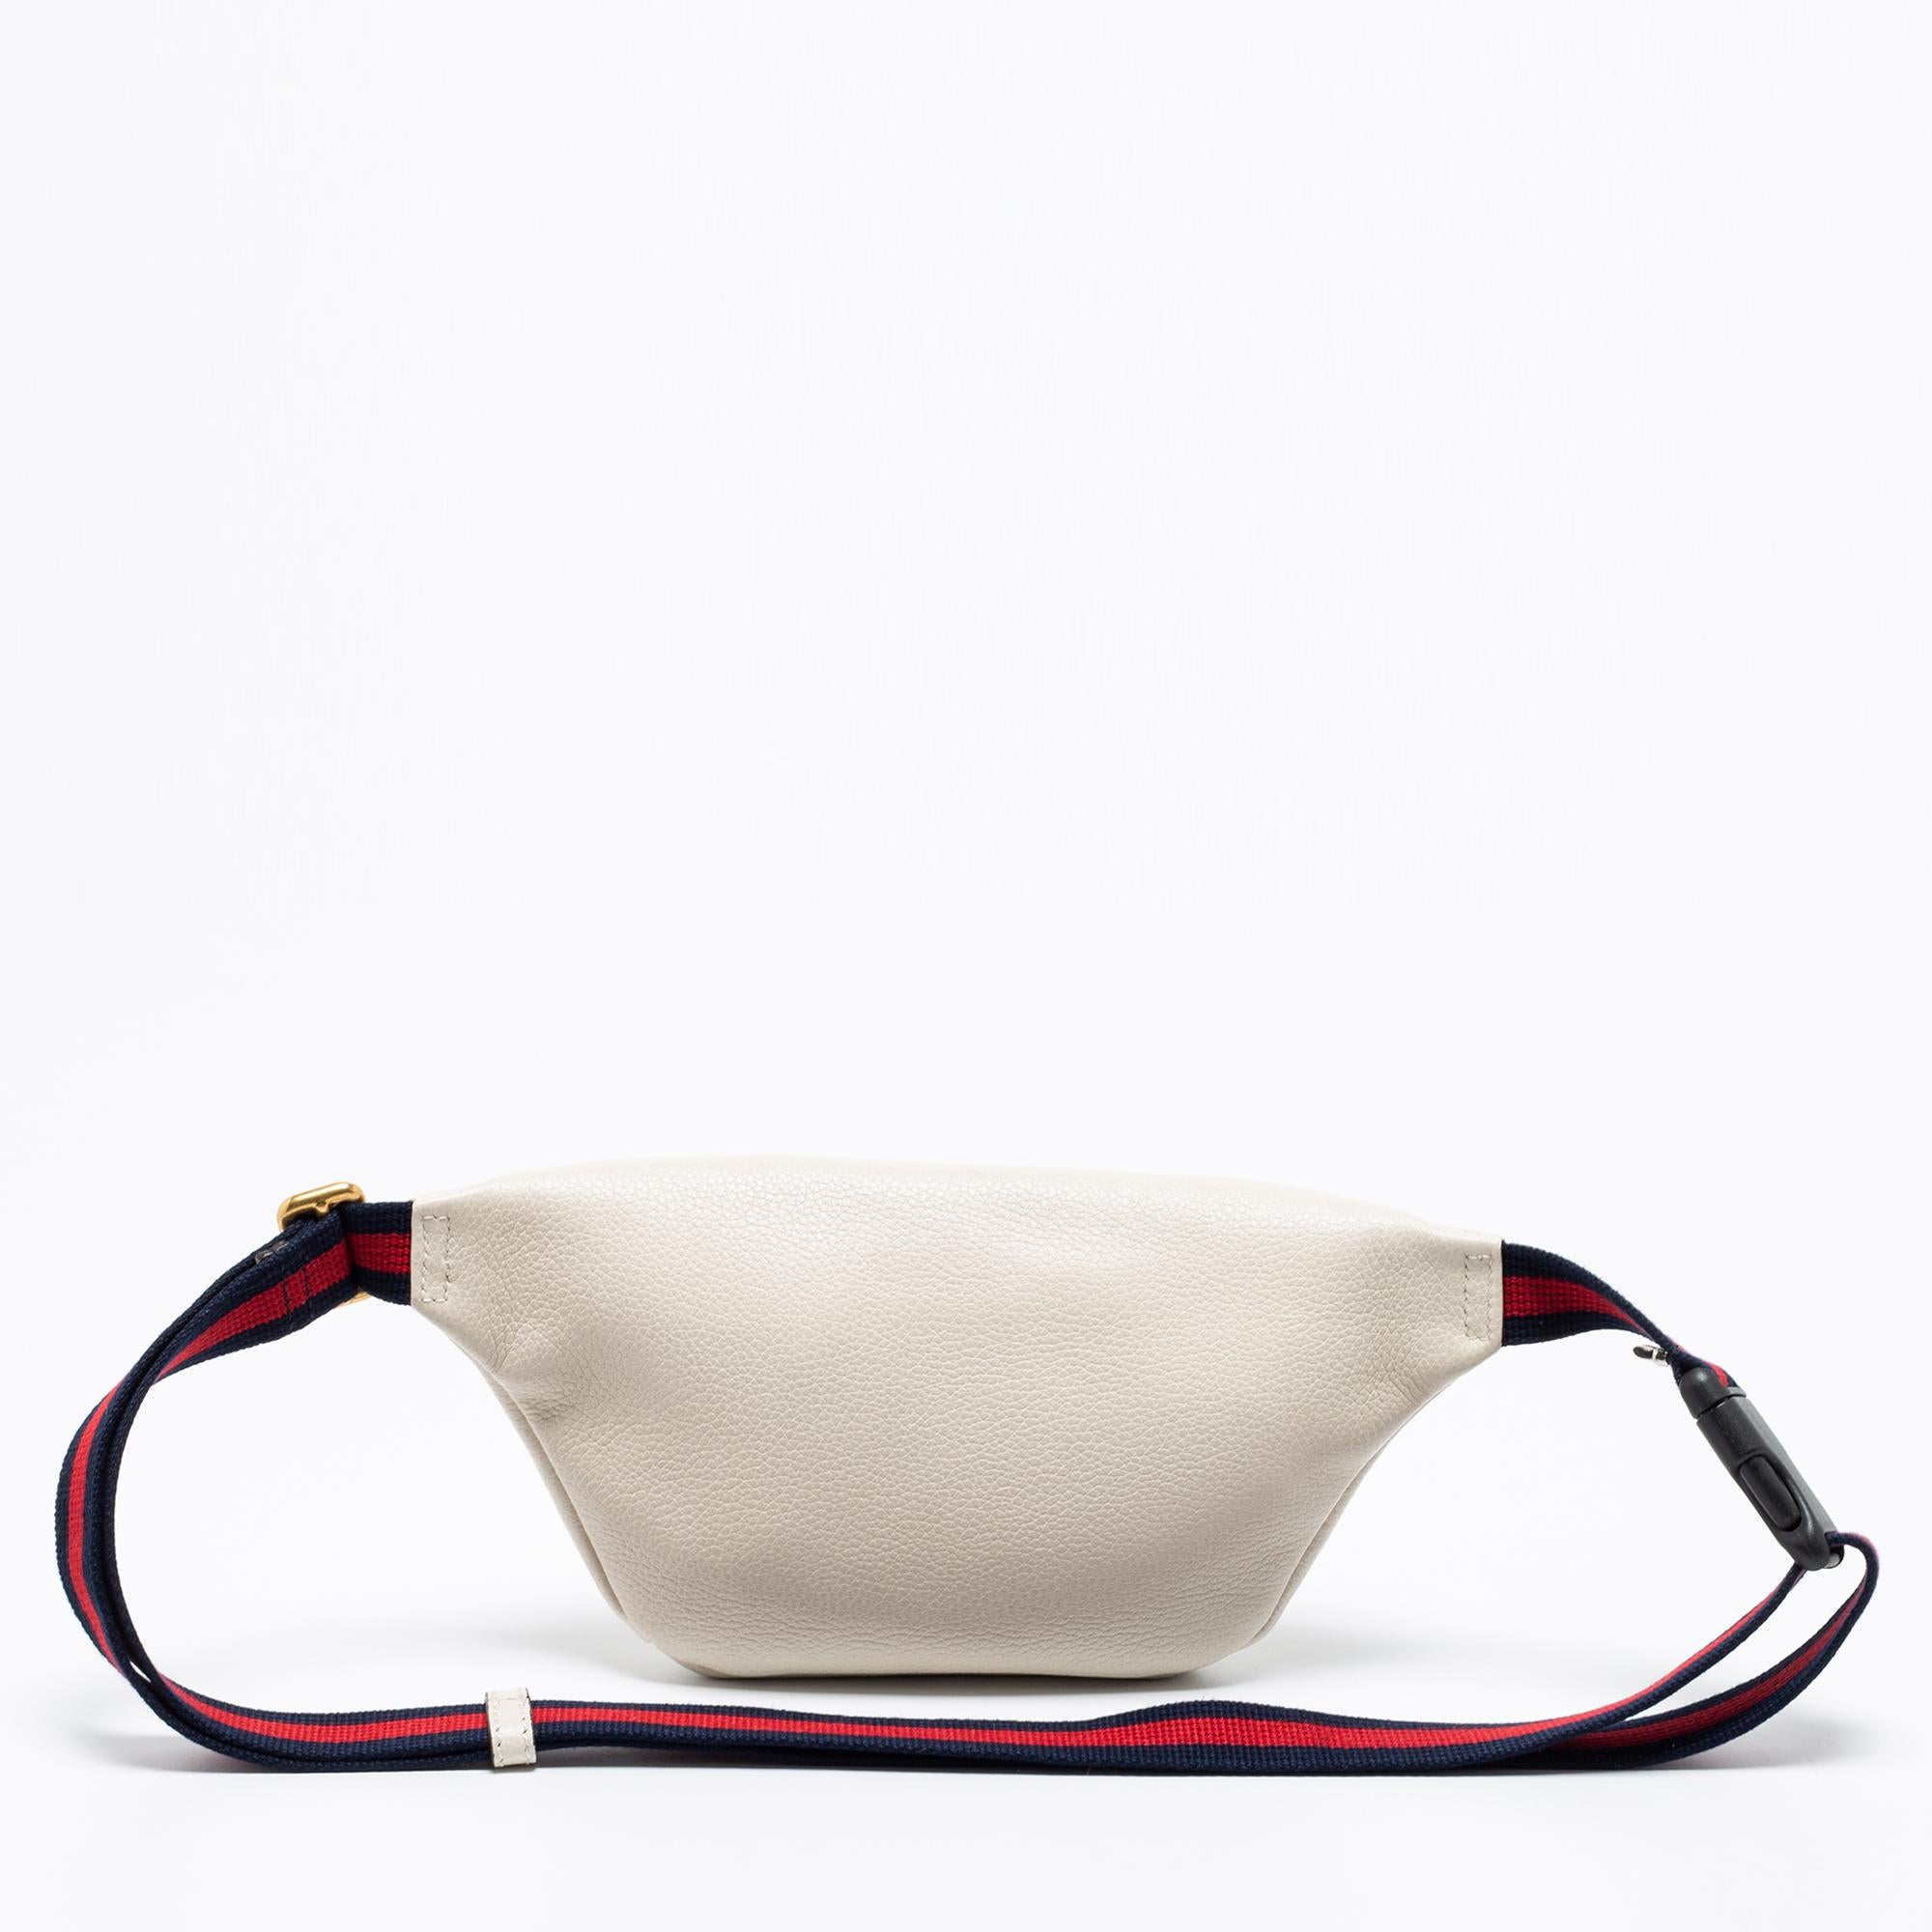 Elevated with traditional elements, this Gucci belt bag strikes the perfect balance between fashion and function. Crafted from leather, the brand detailing on the front and the Web stripe detailed waist belt offer it a statement appeal. The